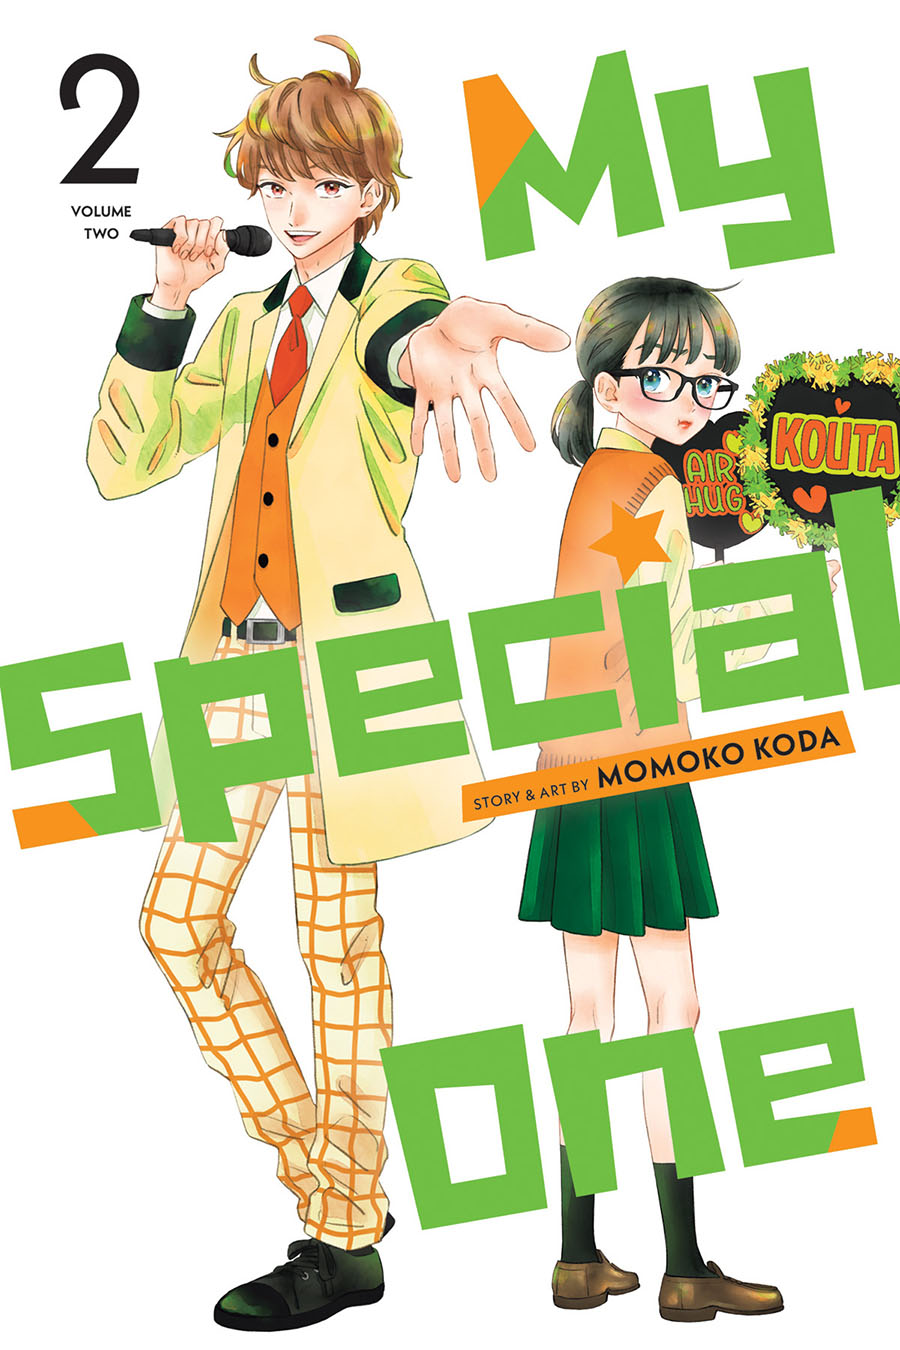 My Special One Vol 2 GN